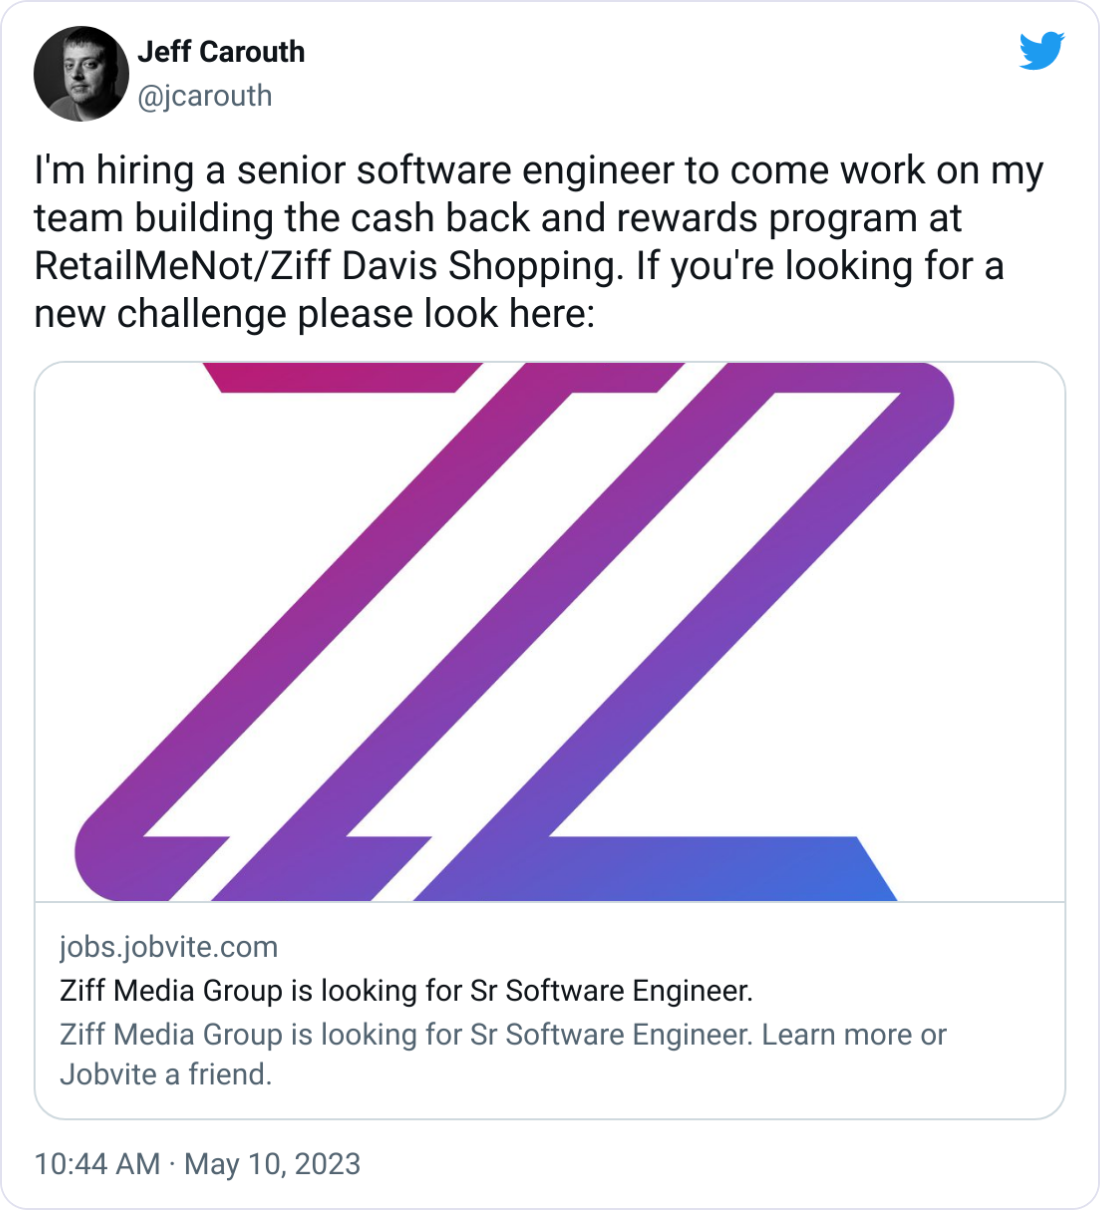  Jeff Carouth @jcarouth I'm hiring a senior software engineer to come work on my team building the cash back and rewards program at RetailMeNot/Ziff Davis Shopping. If you're looking for a new challenge please look here: